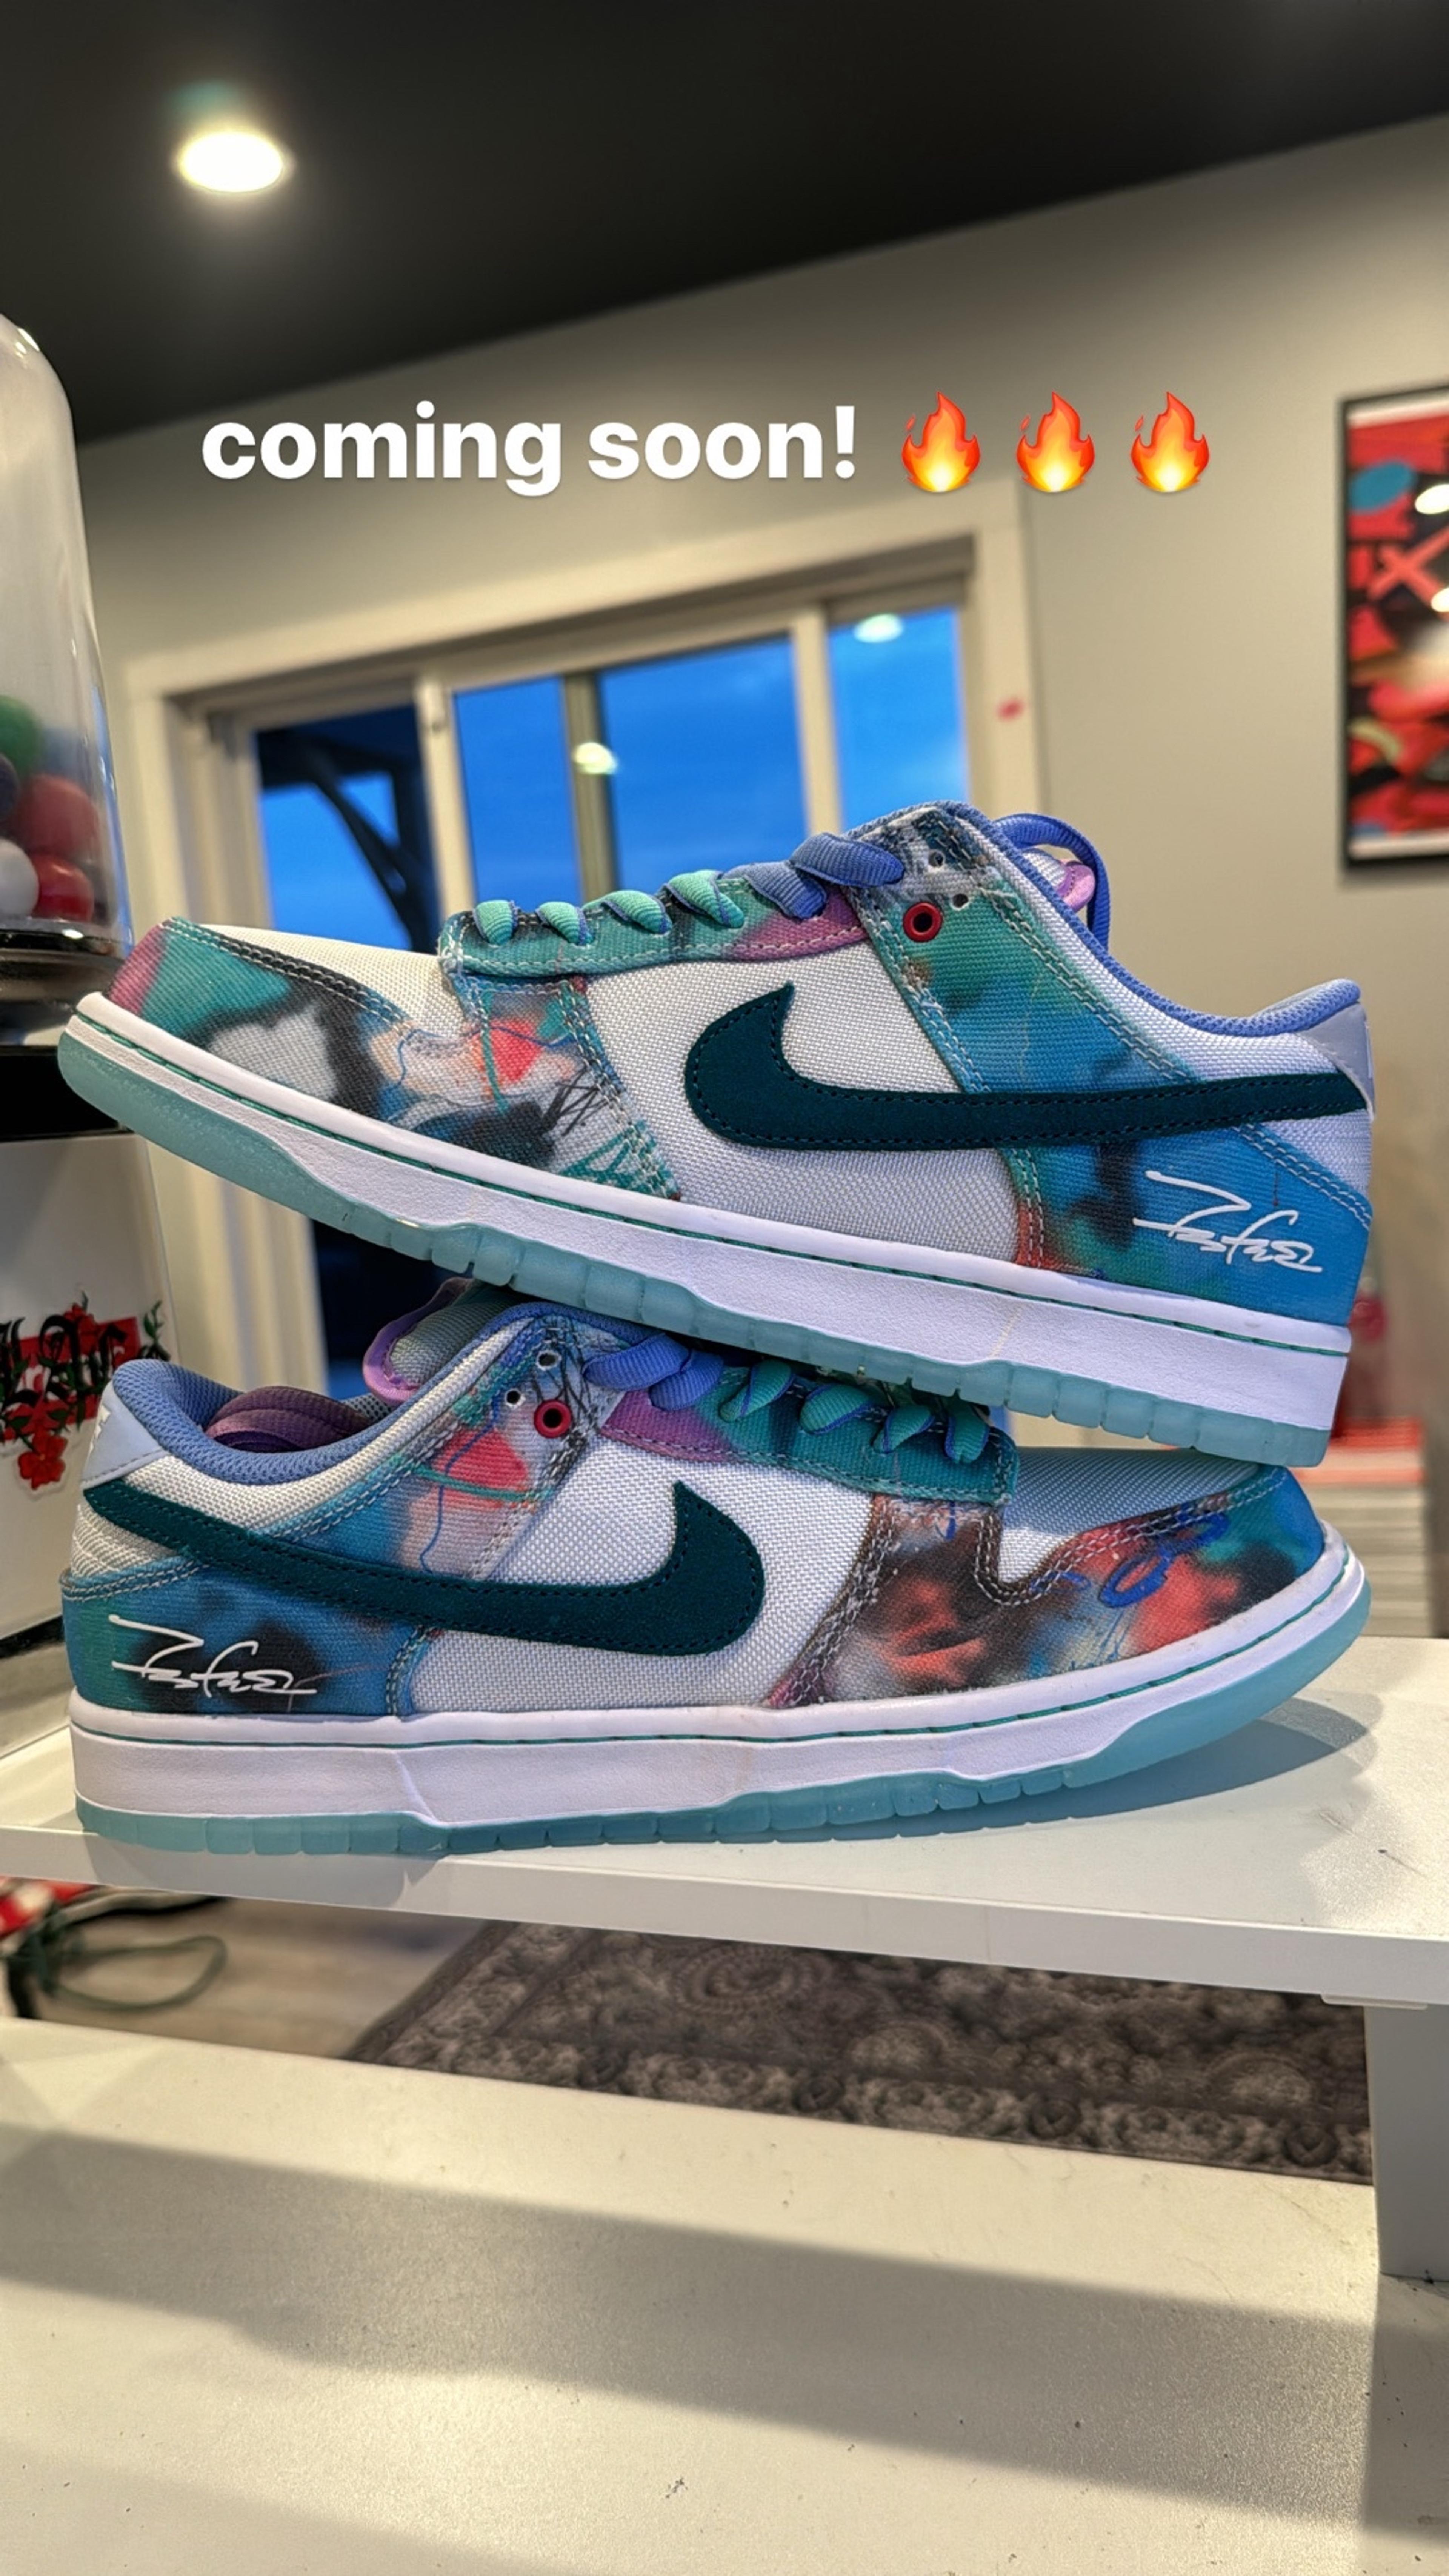 Preview image for the show titled "6k INSTANT PULLS TRAVIS FUTURA SB PS5 GIVEAWAYS!🔥🔥" at May 16, 2024